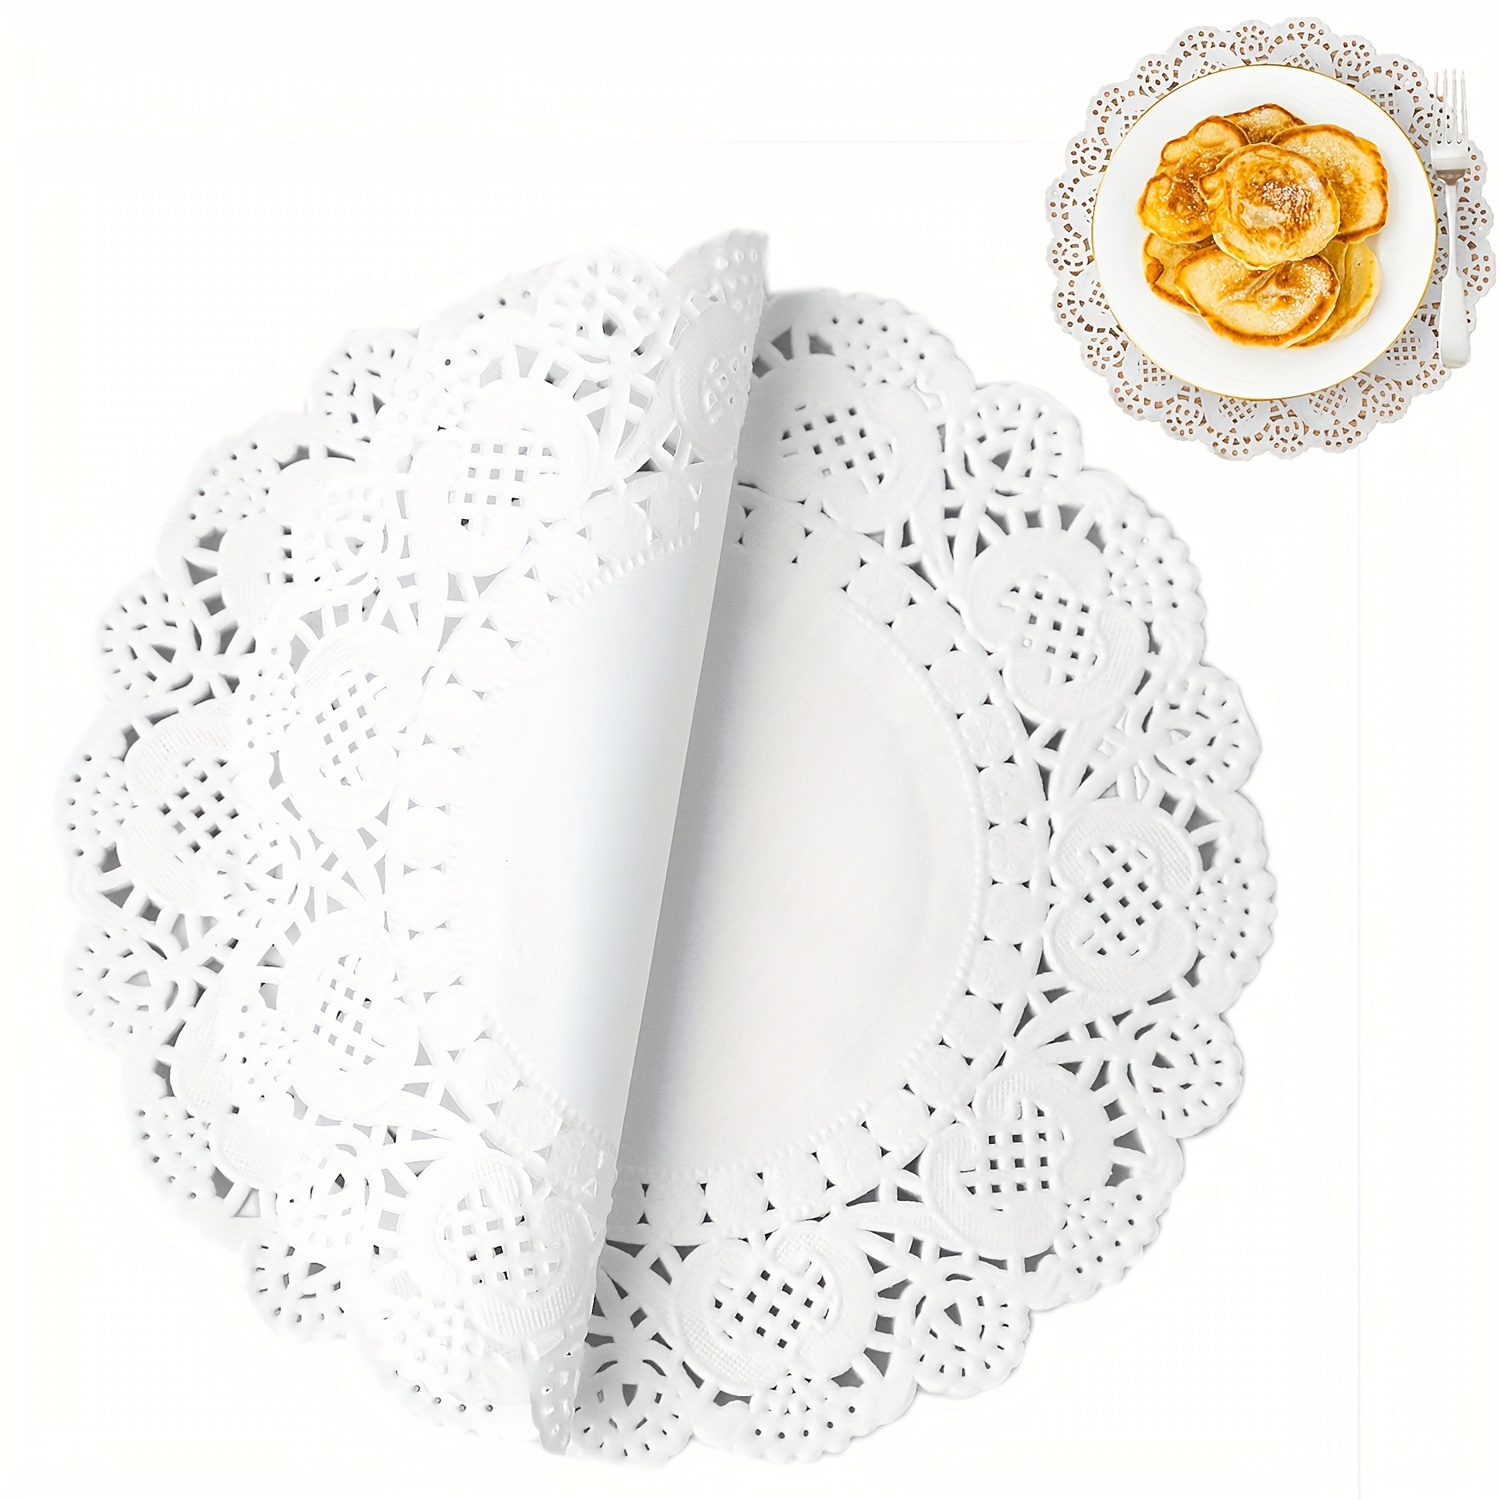 150 Pack Round White Paper Doilies for Crafts, Tableware Decor, Parties,  Wedding, Assorted Size Charger Plates for Cakes, Desserts (6.5, 8.5, and  10.5